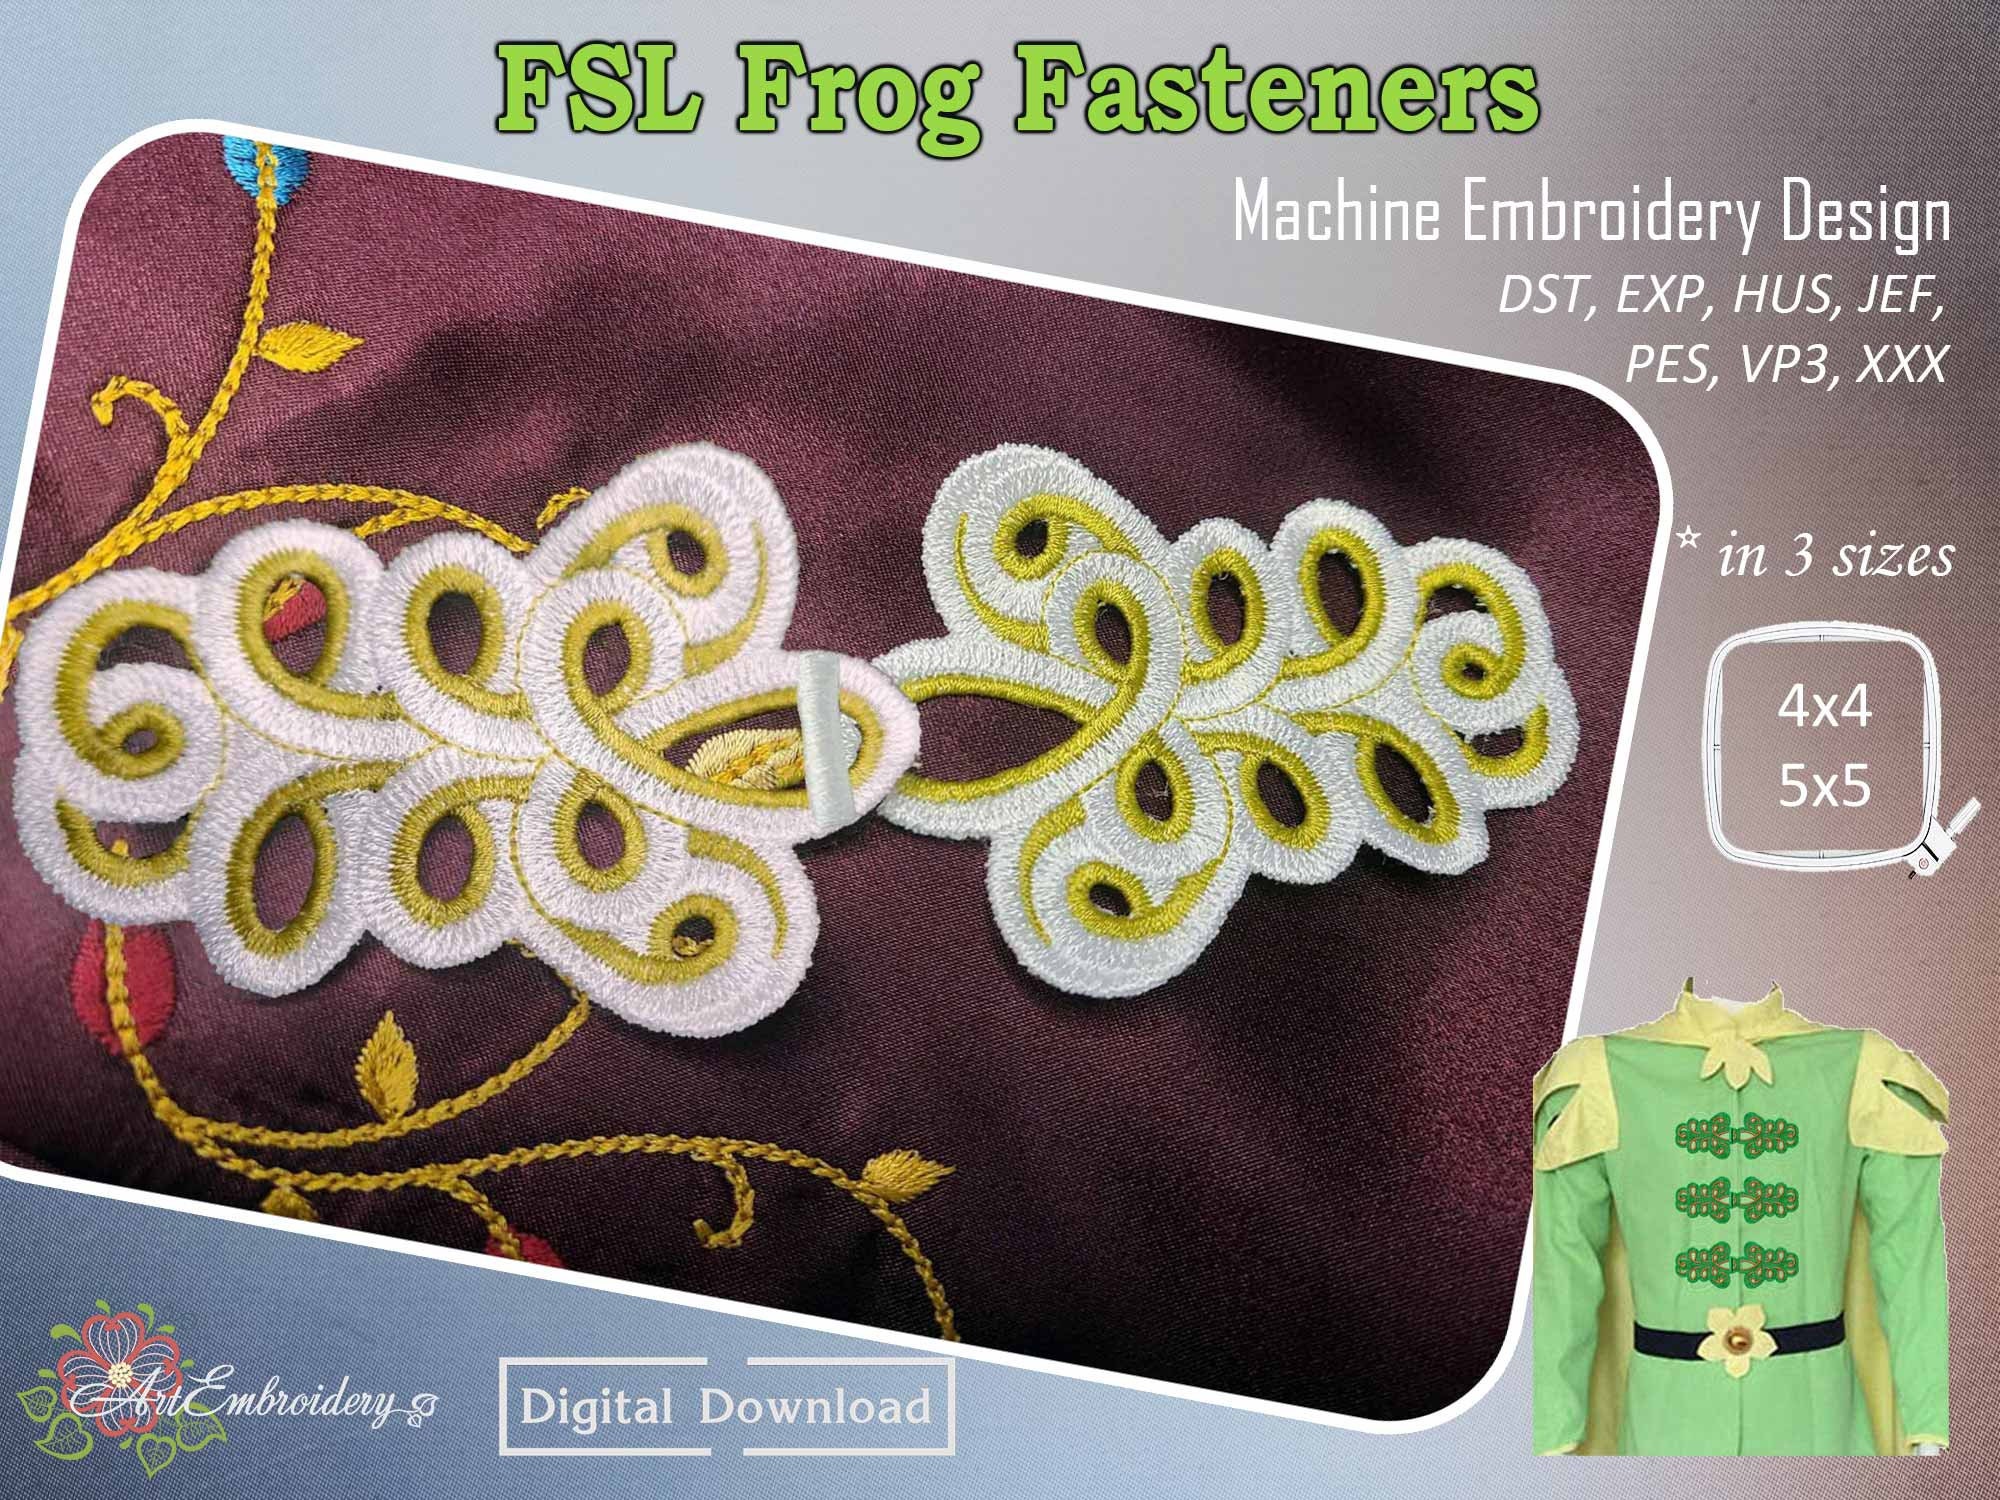 ▷ Hook and Eye Clasp Sales and Models - Frog Fasteners 10 mm Hook